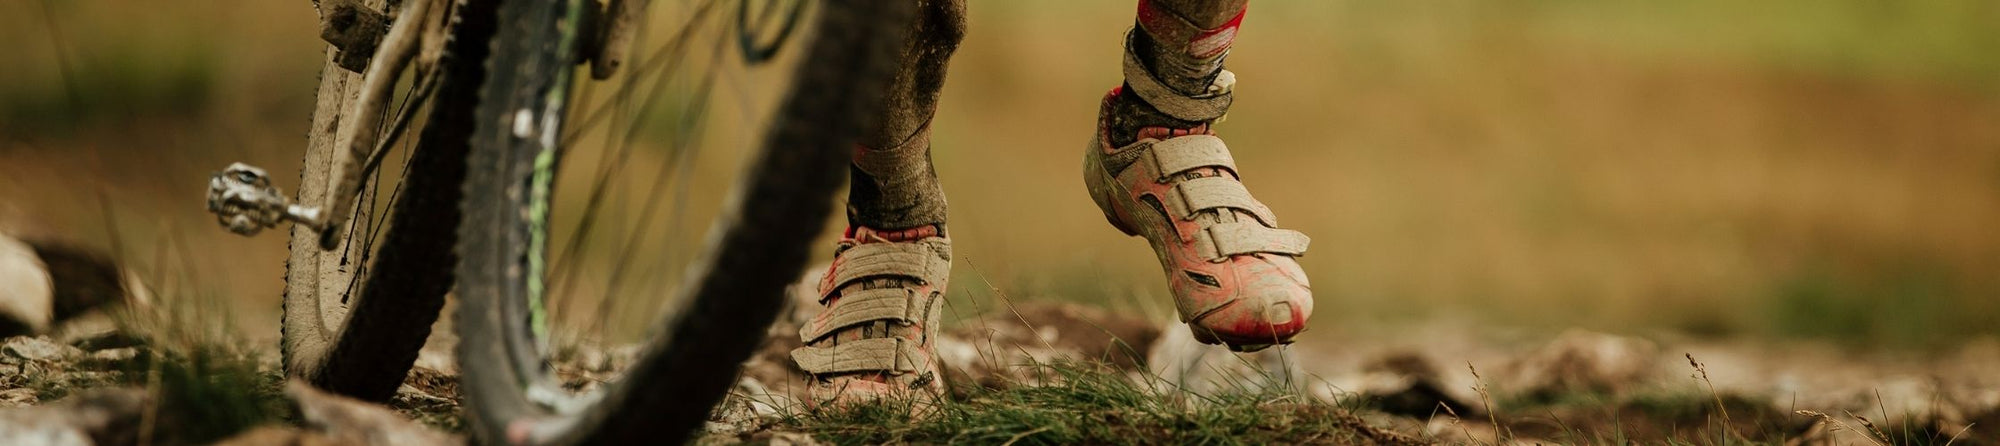 5 Tips for Running or Cycling in the Mud